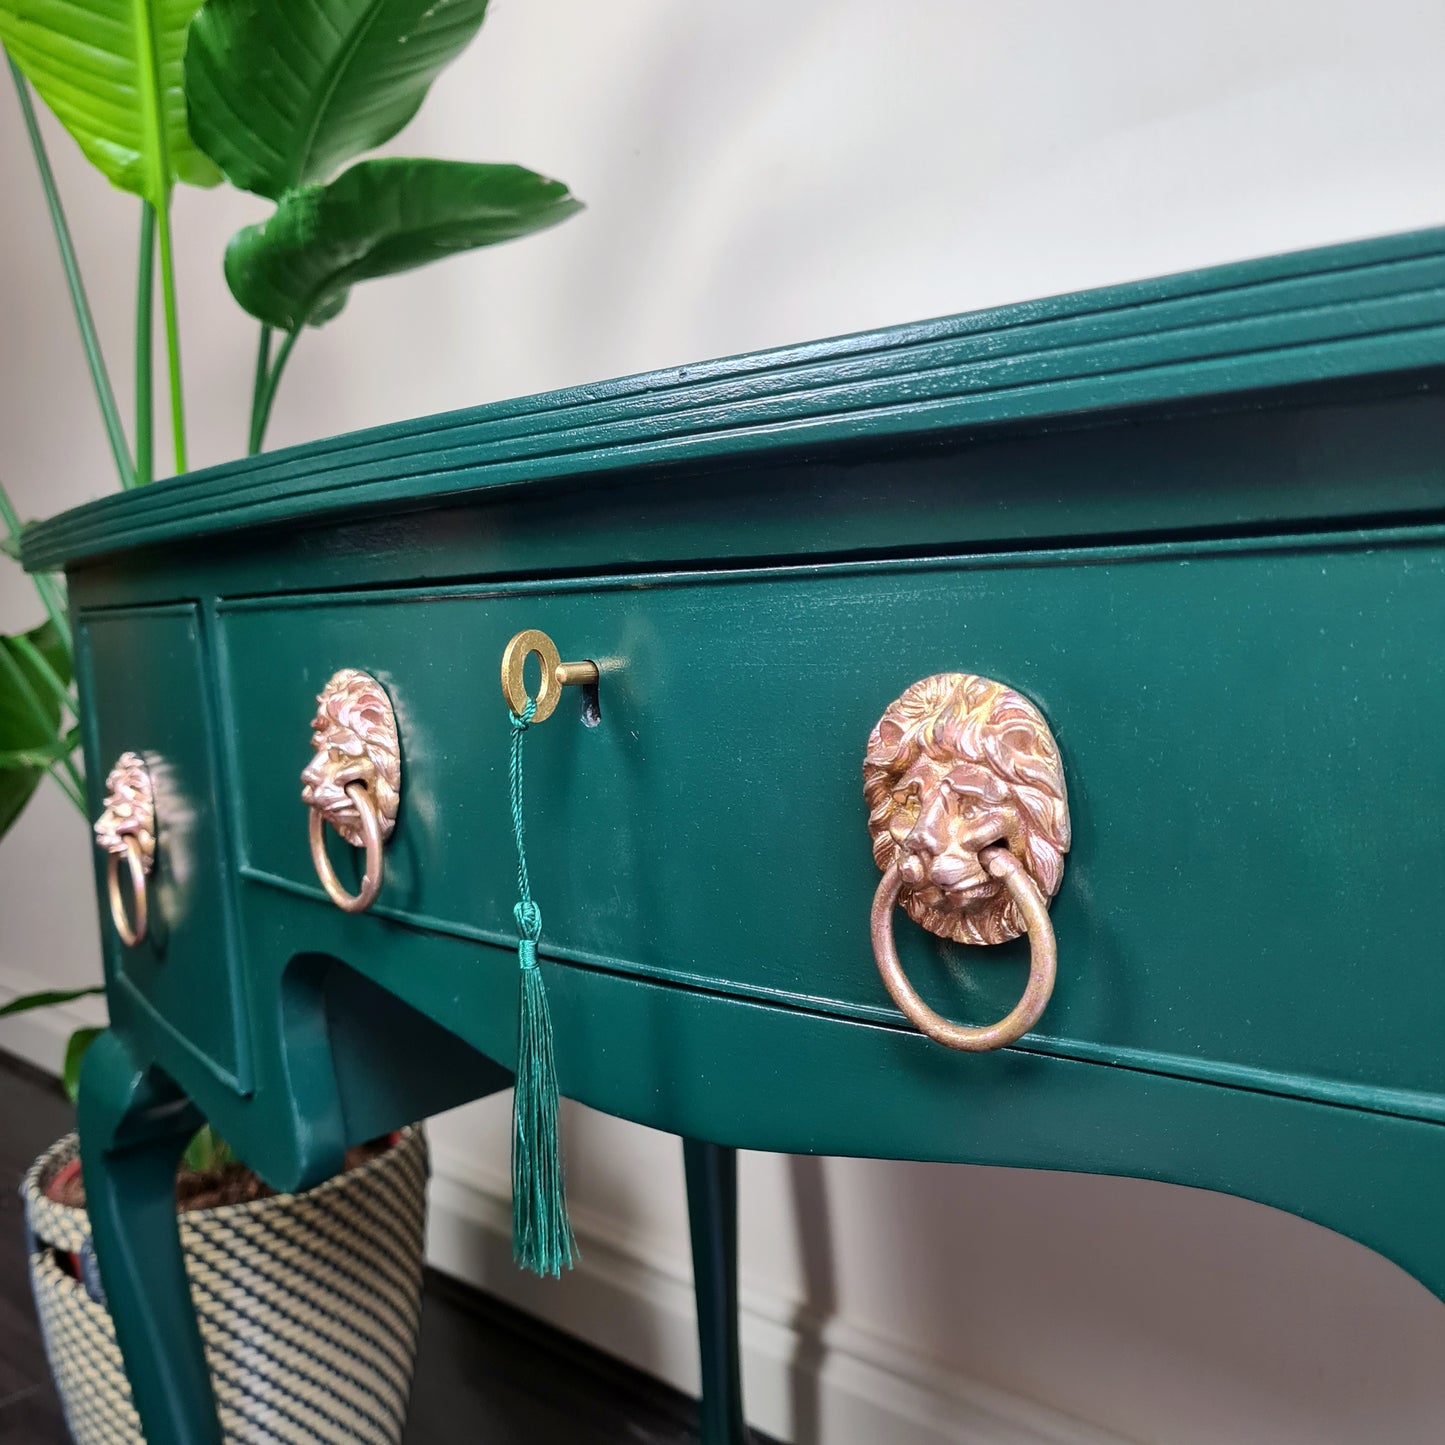 Upcycled Sideboard with Monstera Leaves & Lion Head Handles